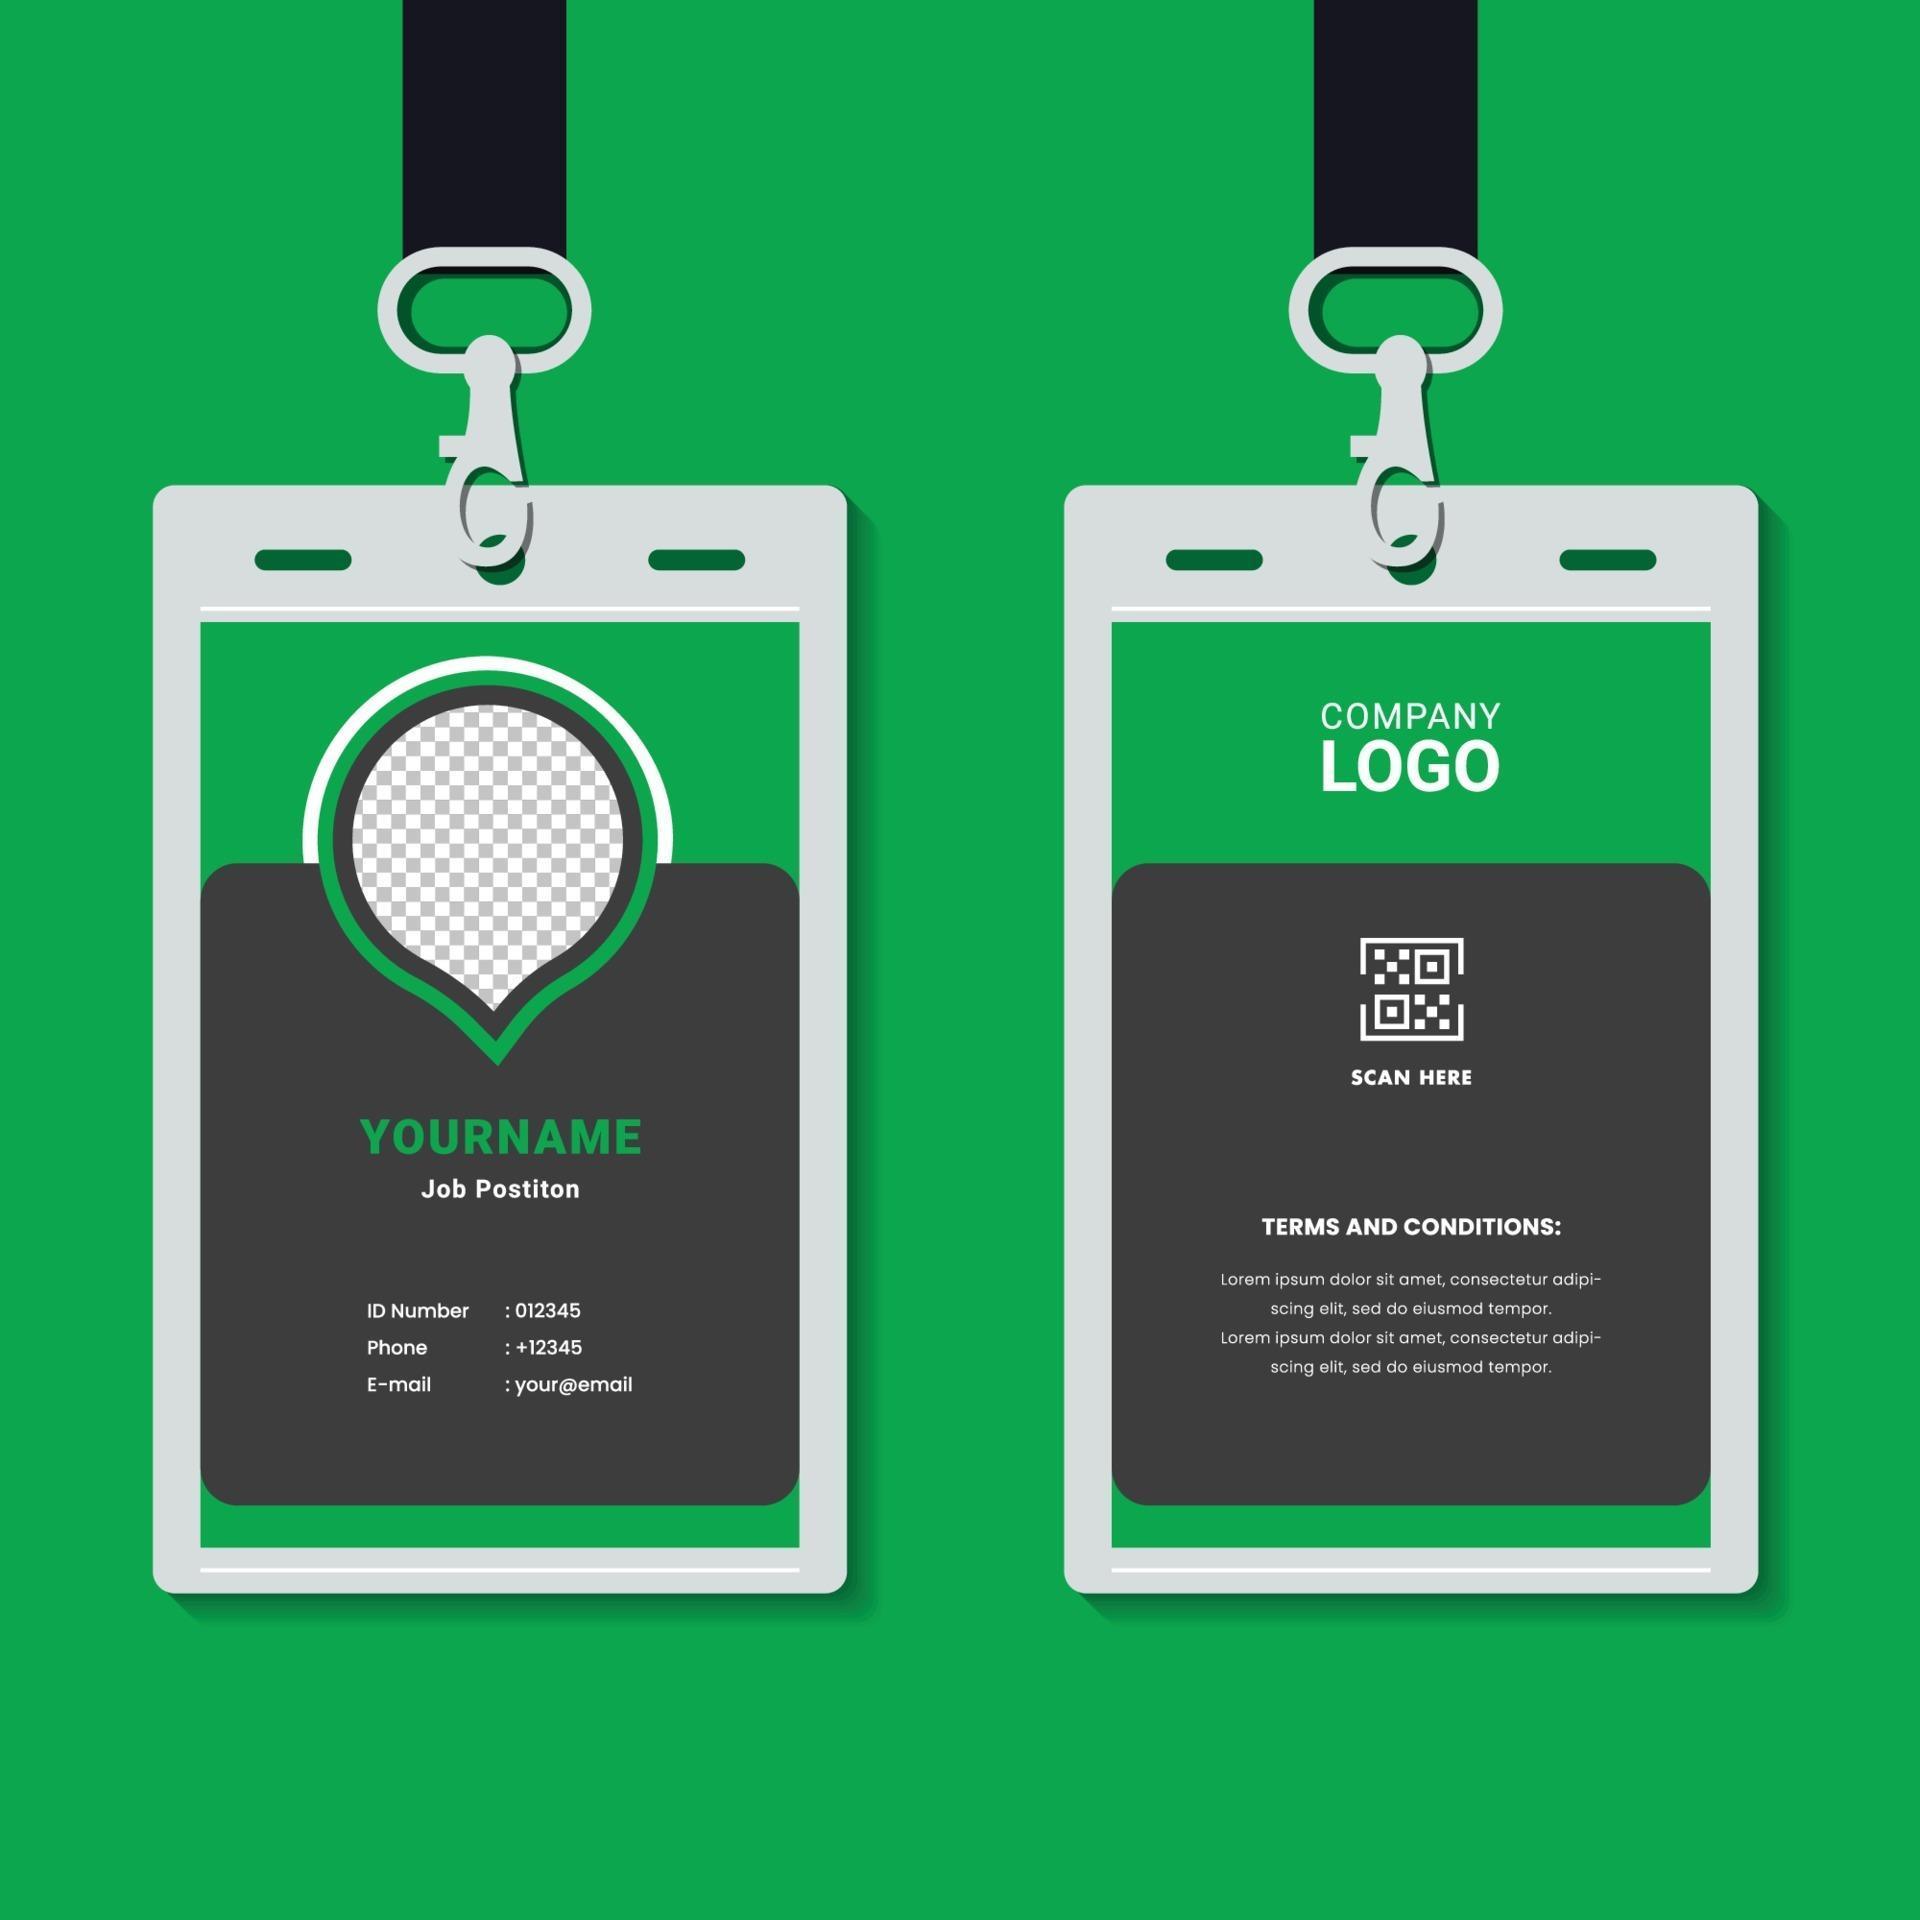 Professional Corporate Id Card Template Clean Green Id Card Design With Geometric Shape Composition Realistic Mockup Free Vector 